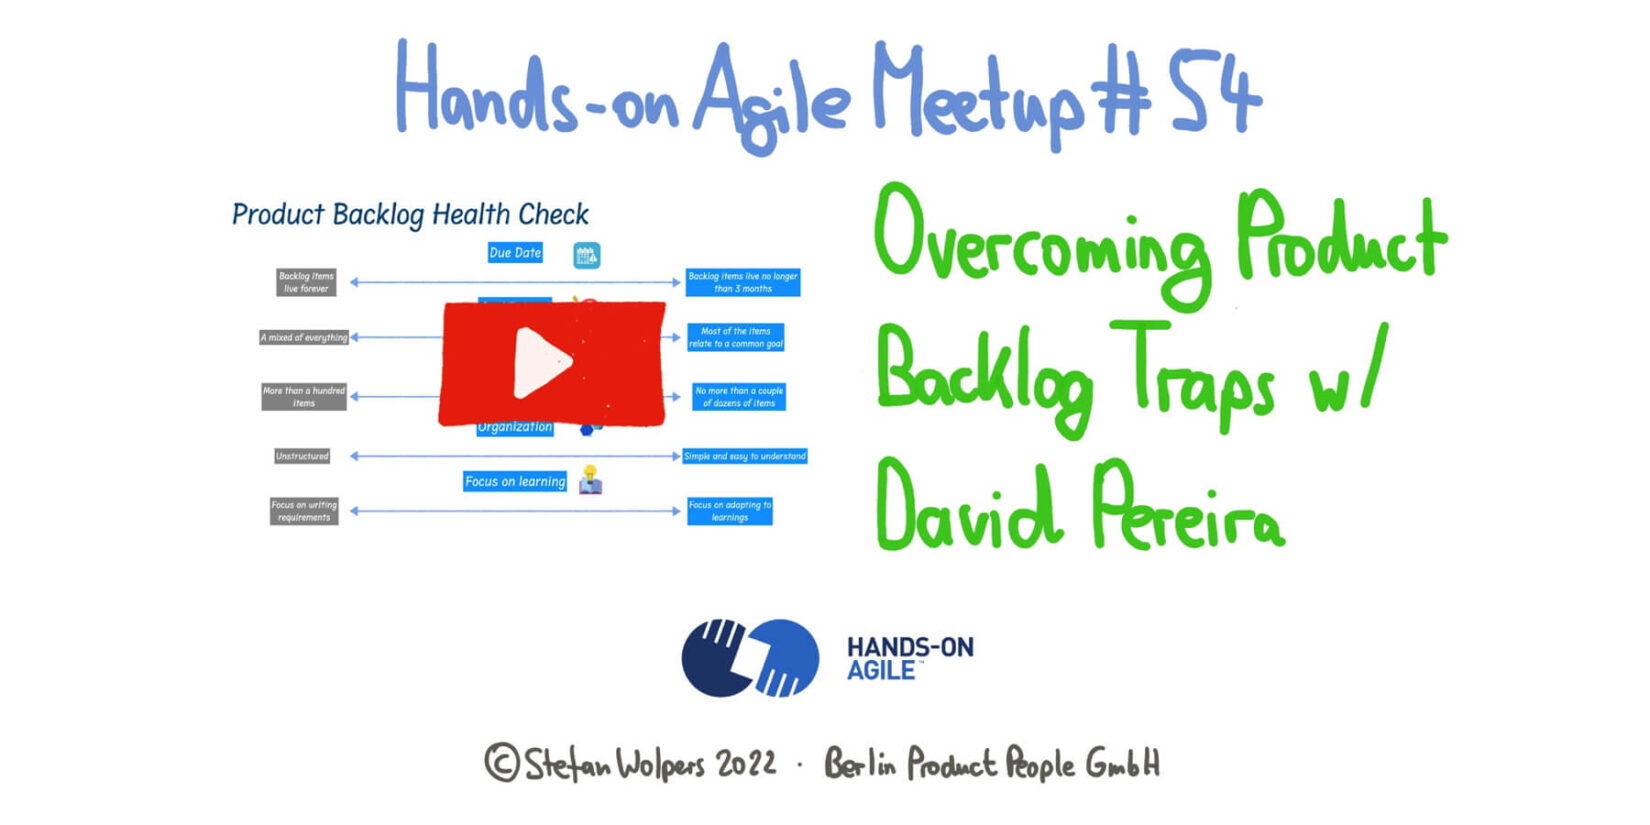 Overcoming Common Product Backlog Management Traps — David Pereira at the 54. Hands-on Agile